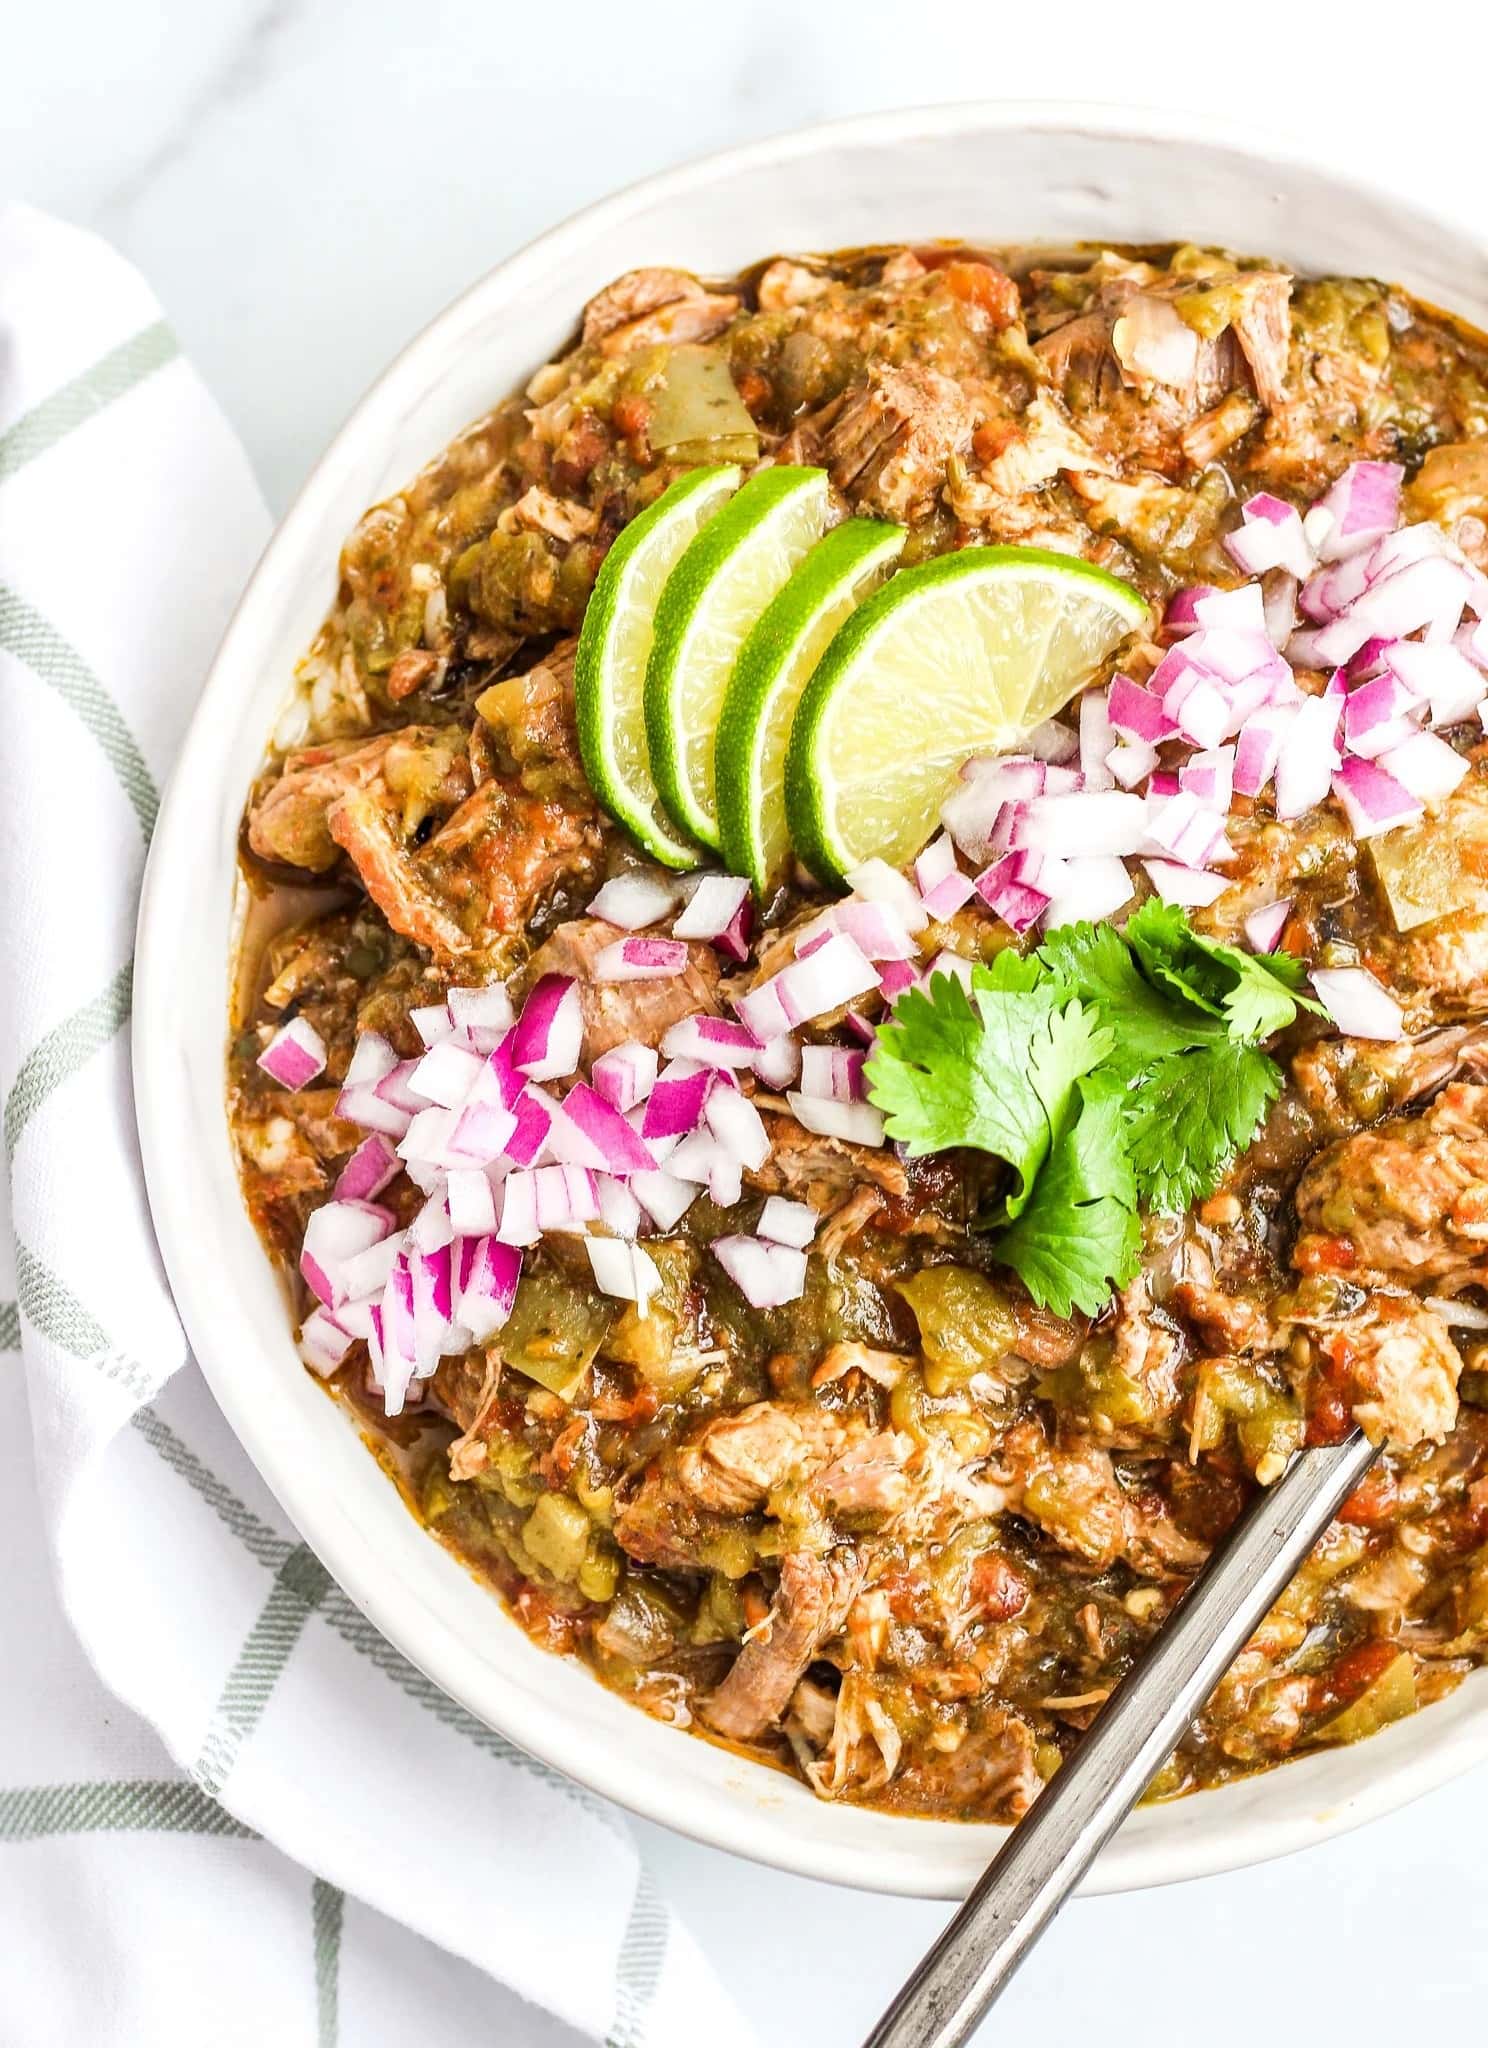 Green Chili with Pork, Onions, Cilantro and Lime